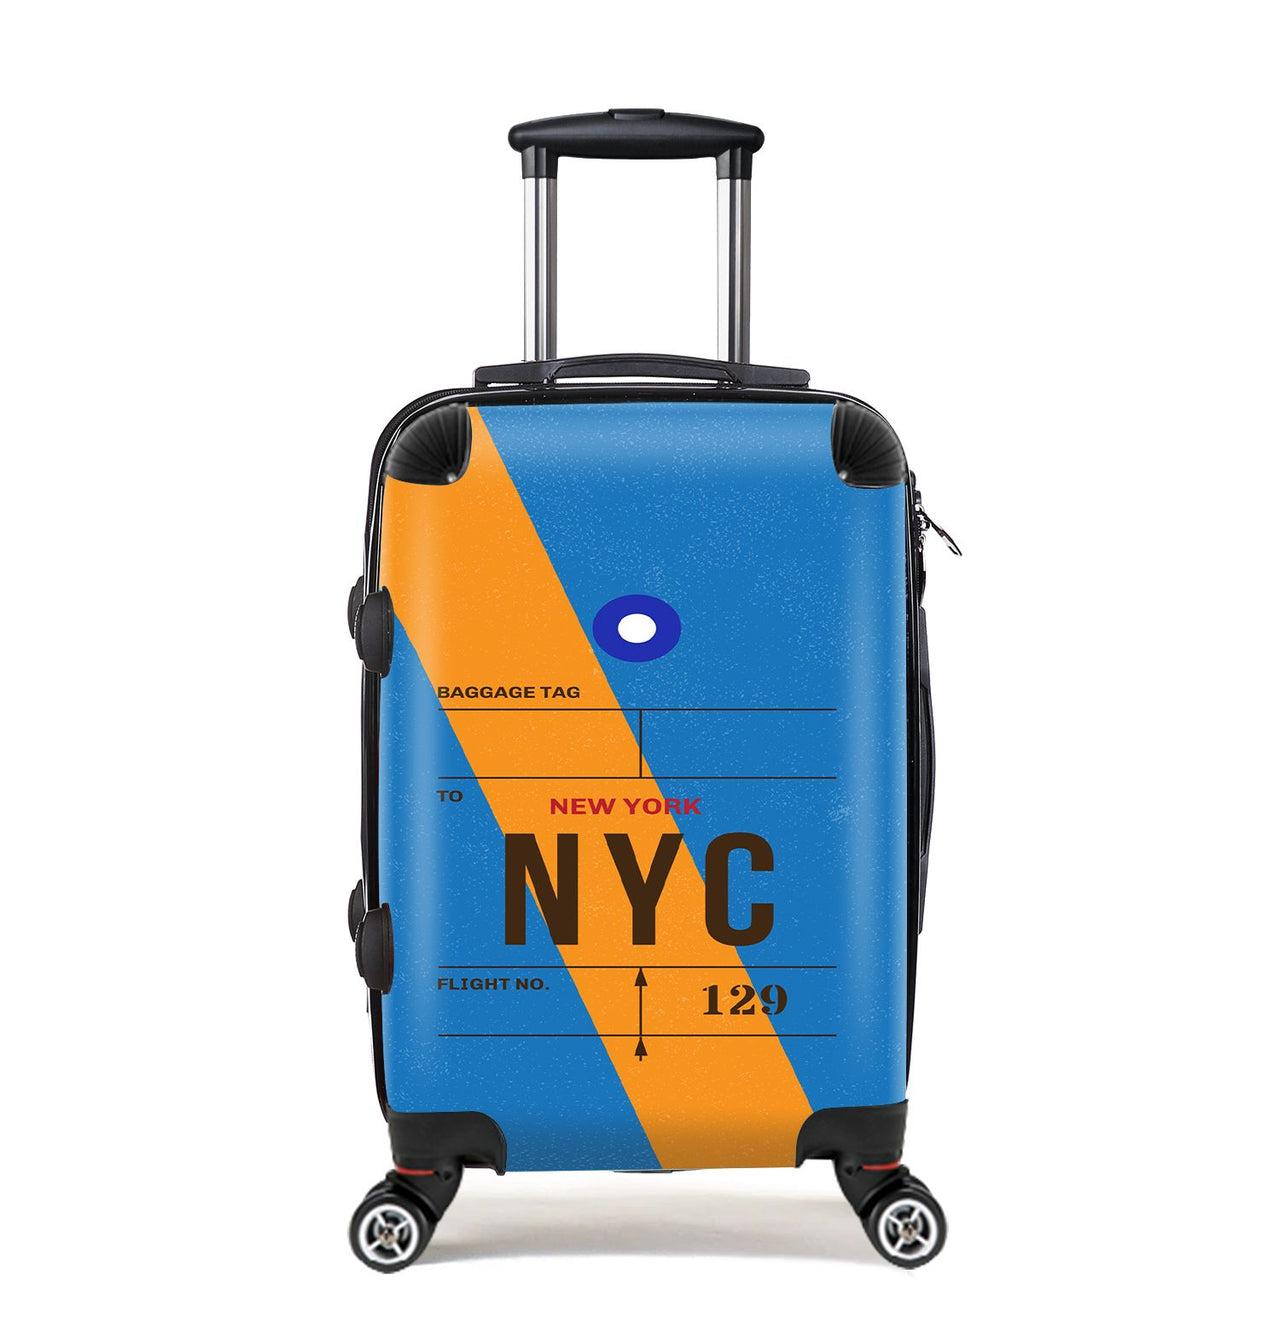 NYC - New York Luggage Tag Designed Cabin Size Luggages